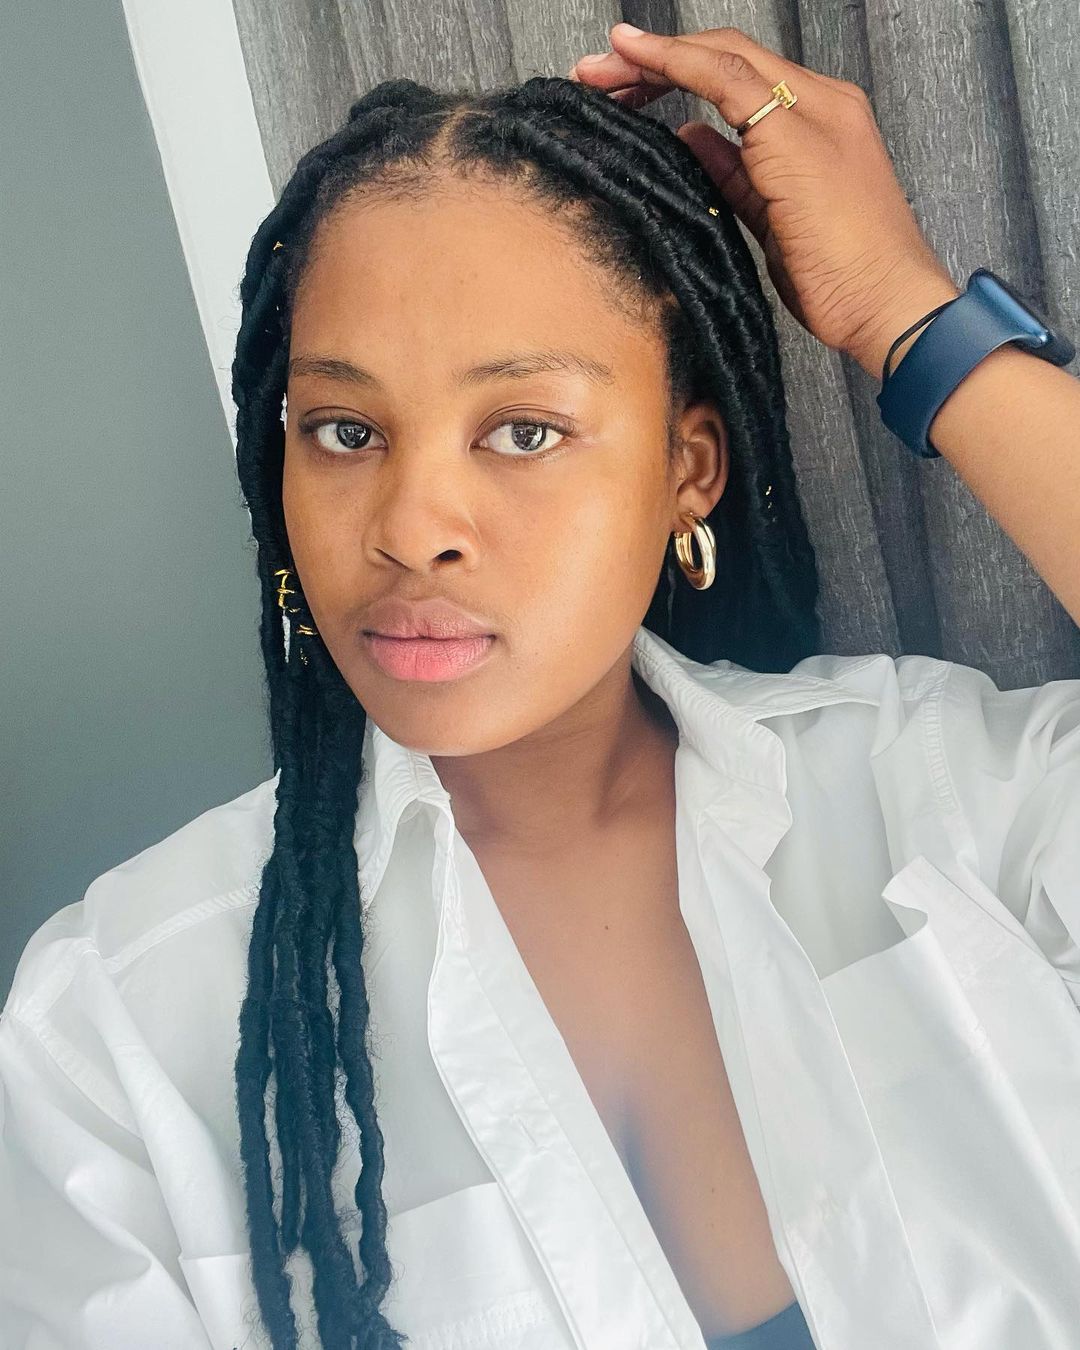 Asavela Mngqithi Biography: Relationship, Age, Family, Education and Career